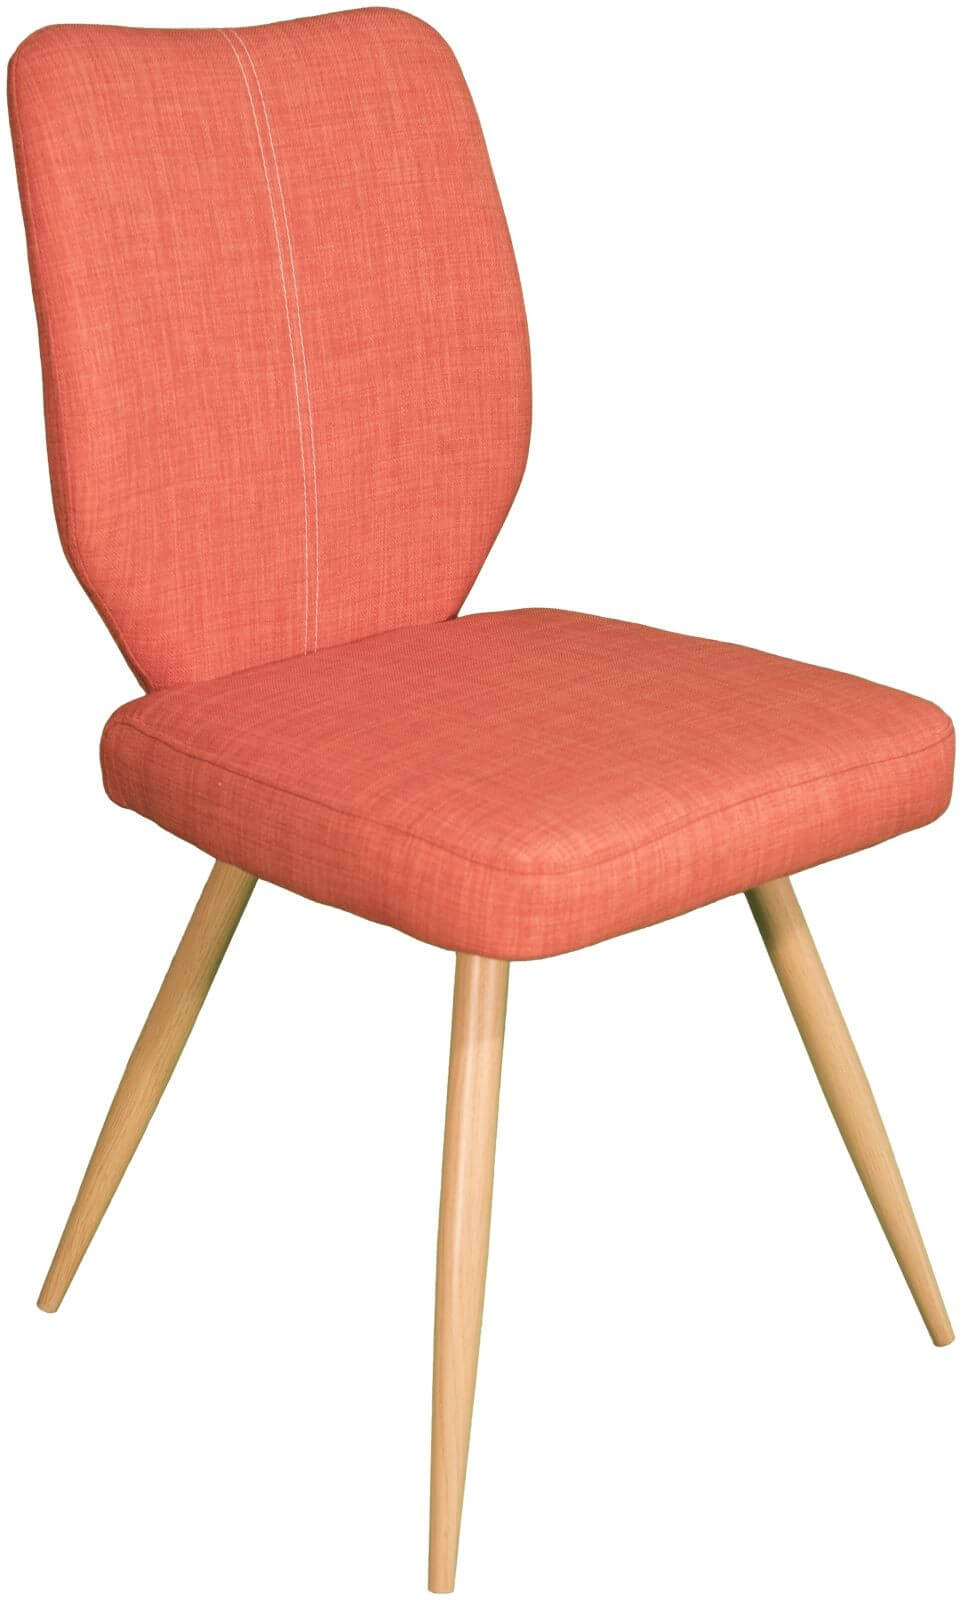 Showing image for Erica  dining chair